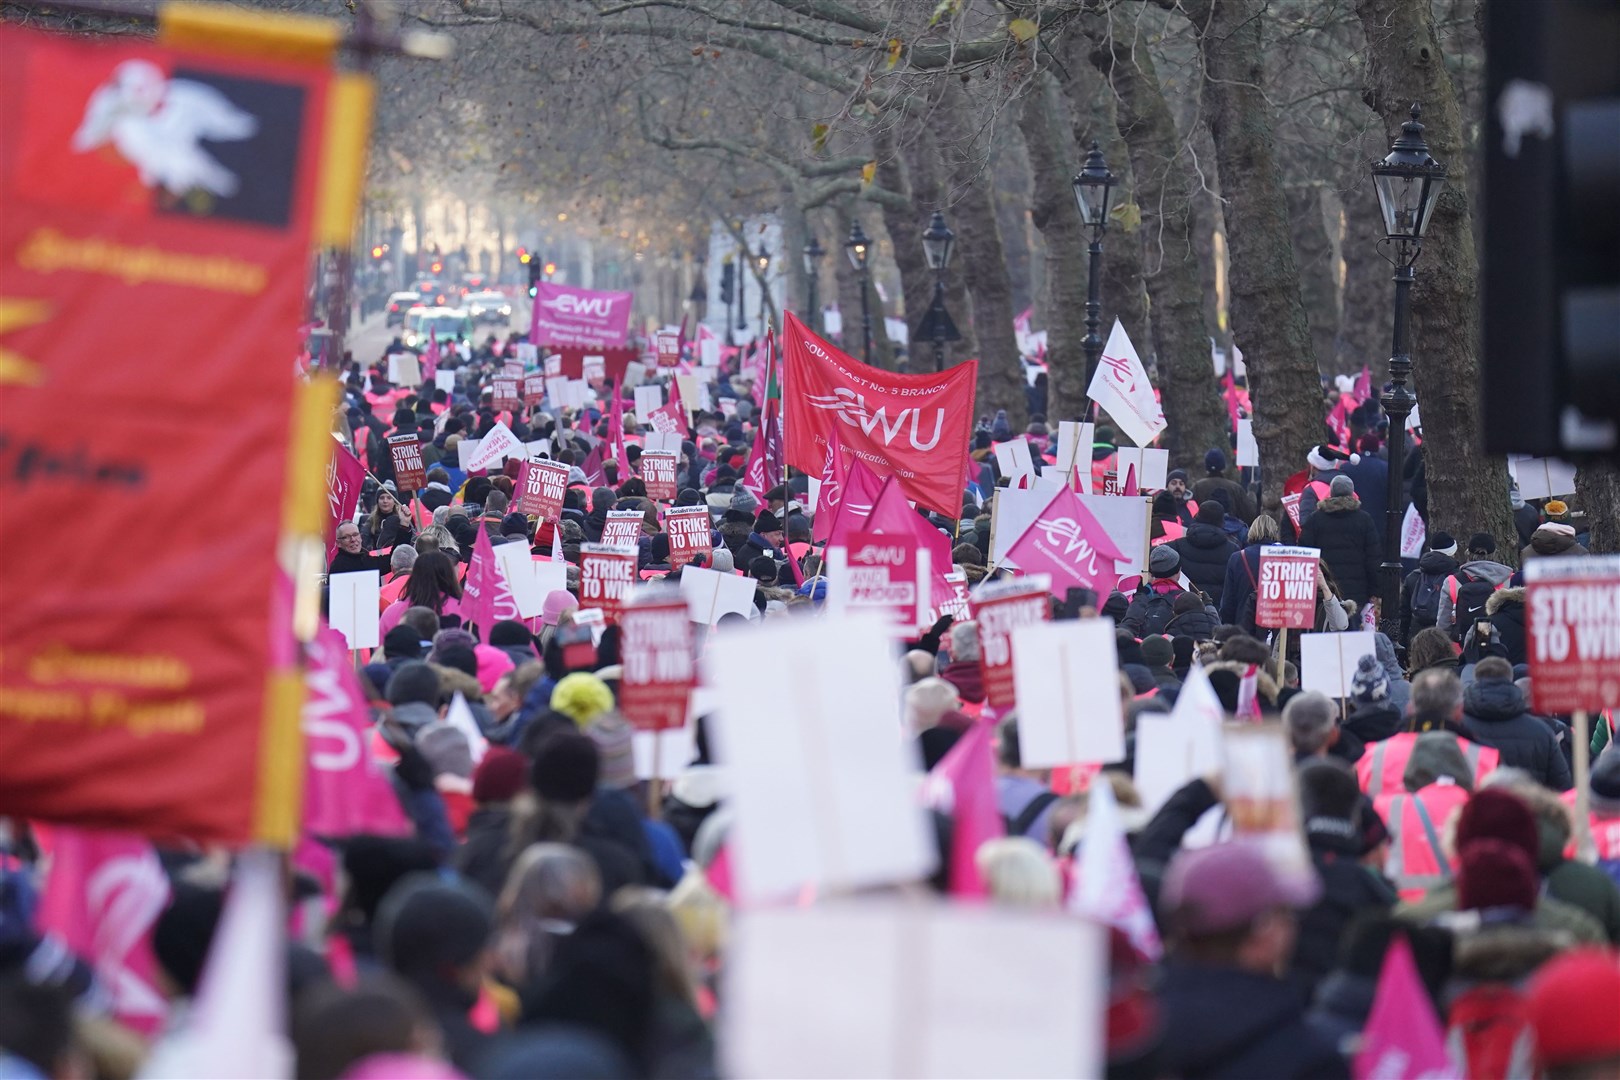 CWU members marched from Parliament Square to St James’s Park on Friday (James Manning/PA)